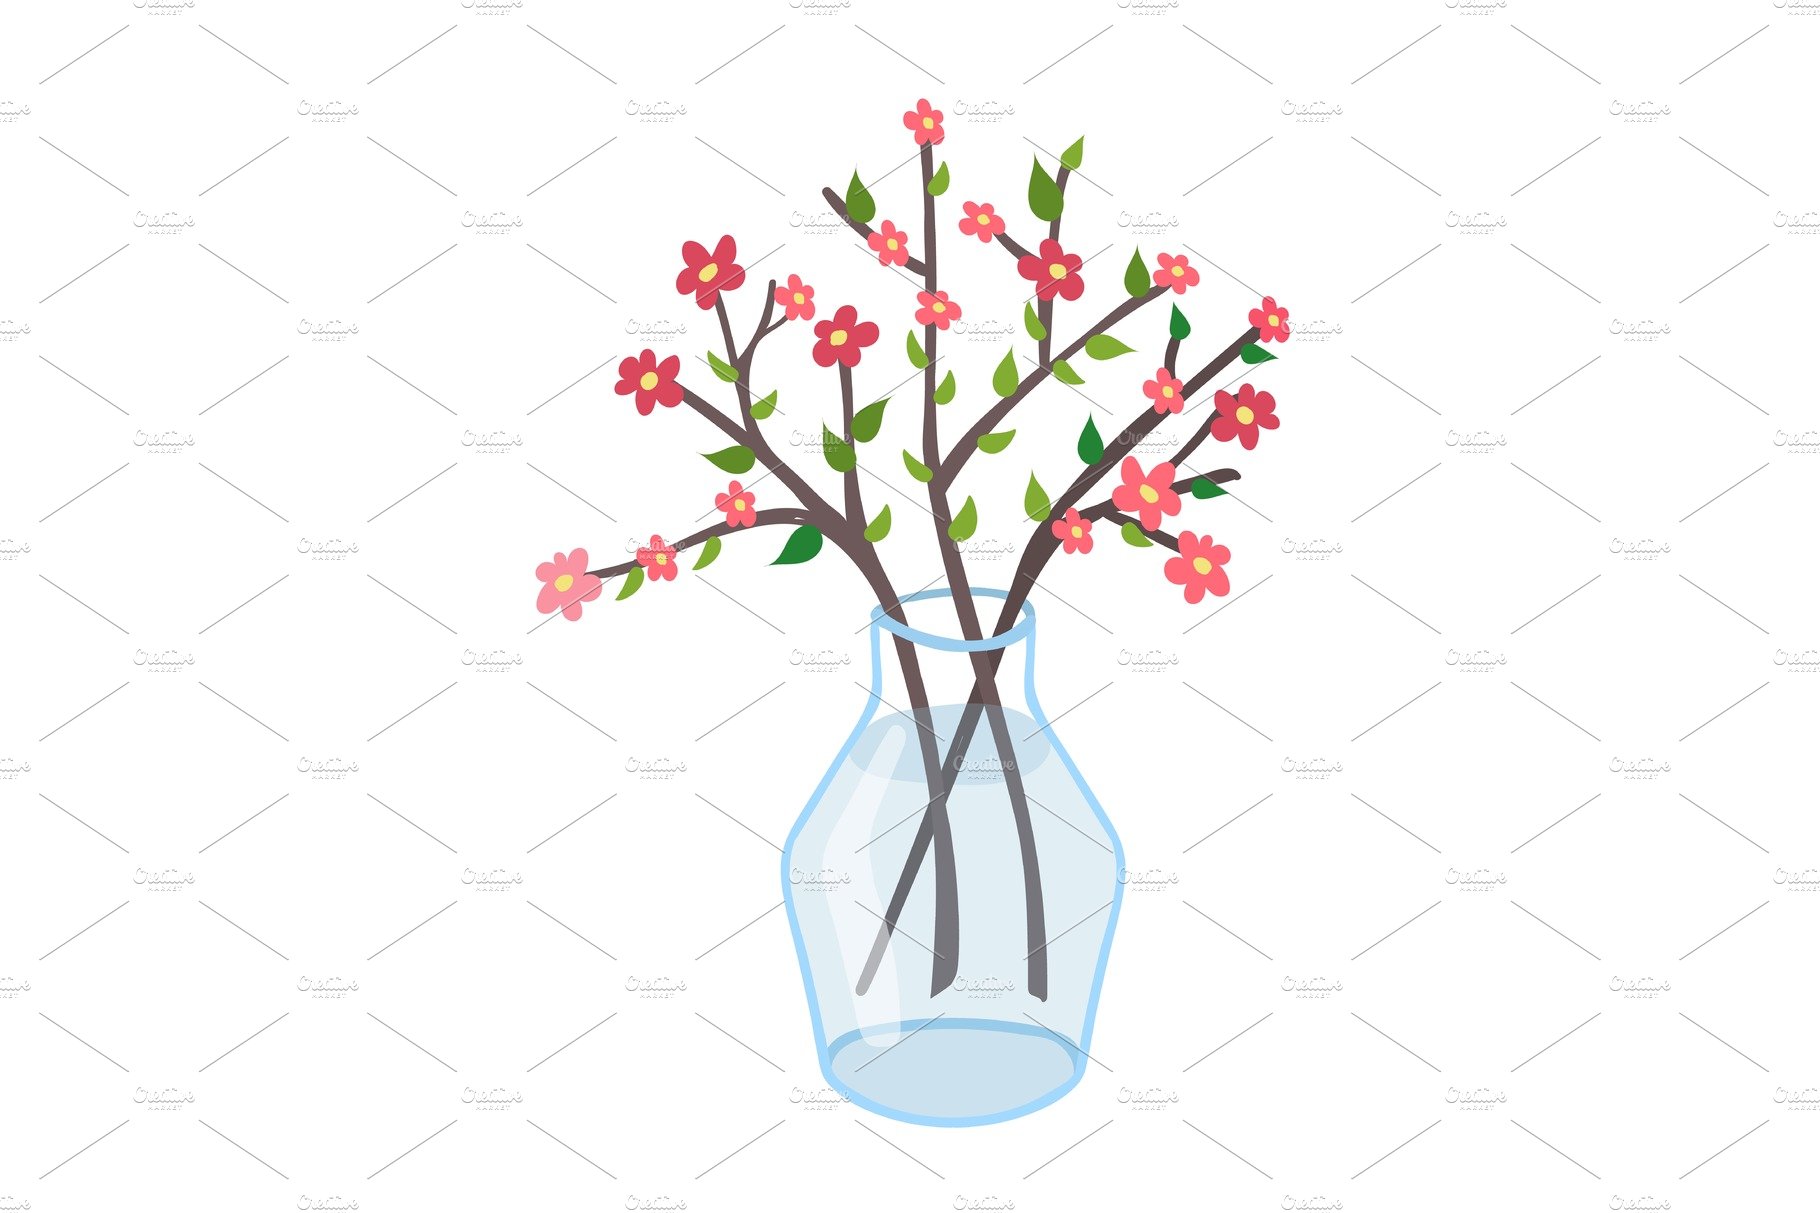 Spring glass transparent jug with cover image.